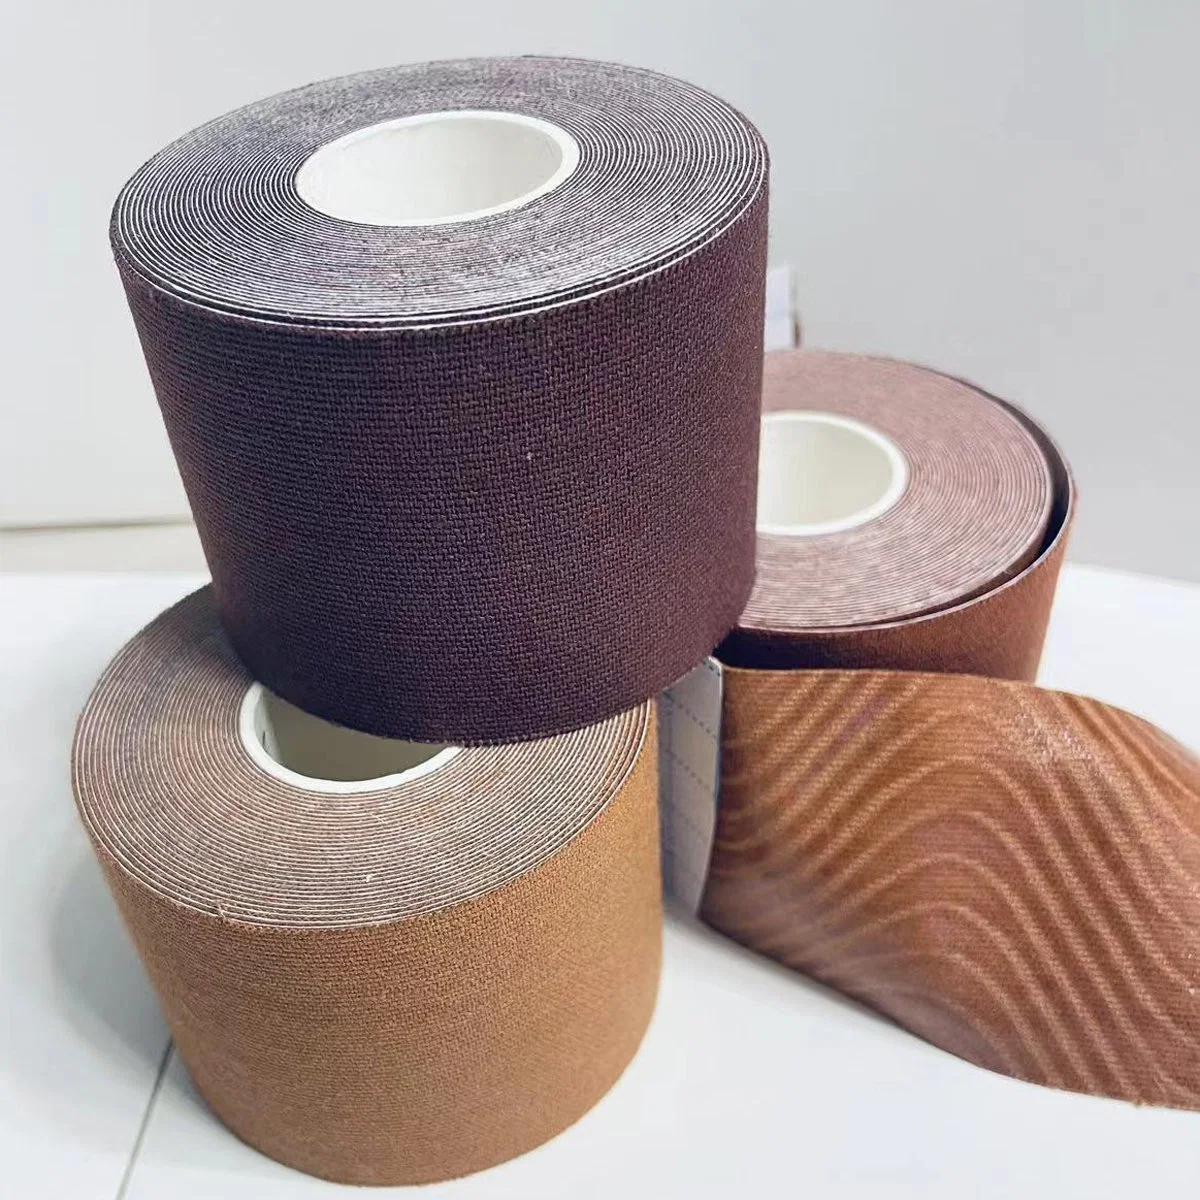 Cotton Plain Muscle Therapy Tape 5cmx5m High Quality with CE ISO FDA